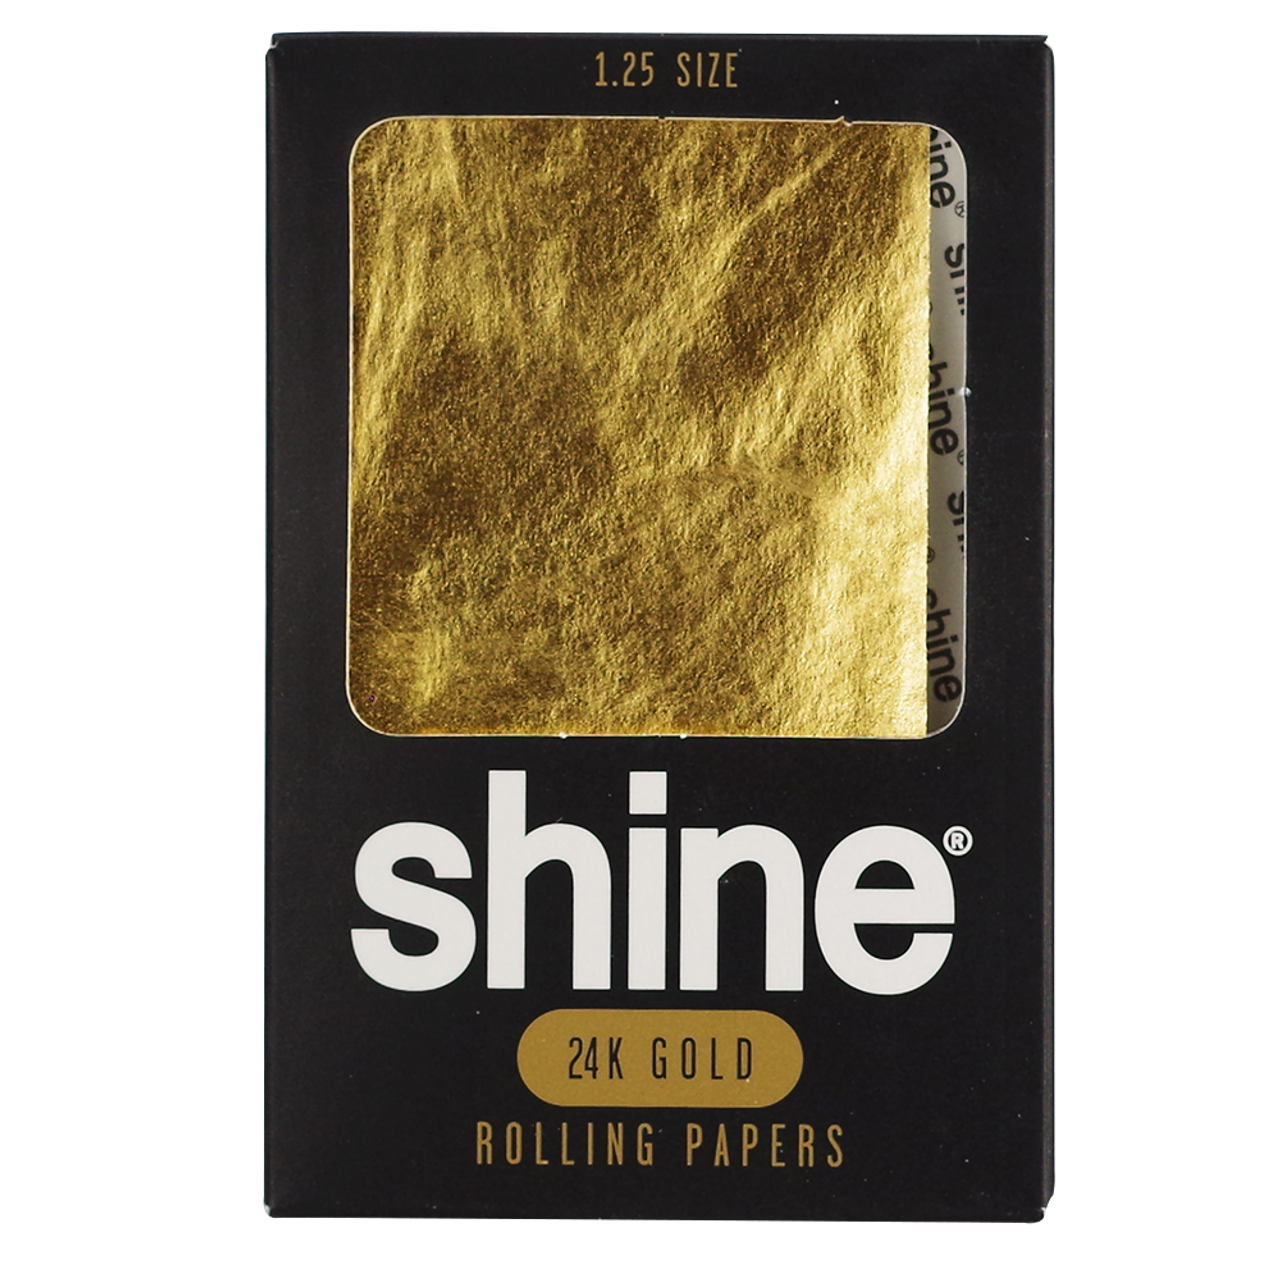 SHINE 24K Gold Rolling Papers